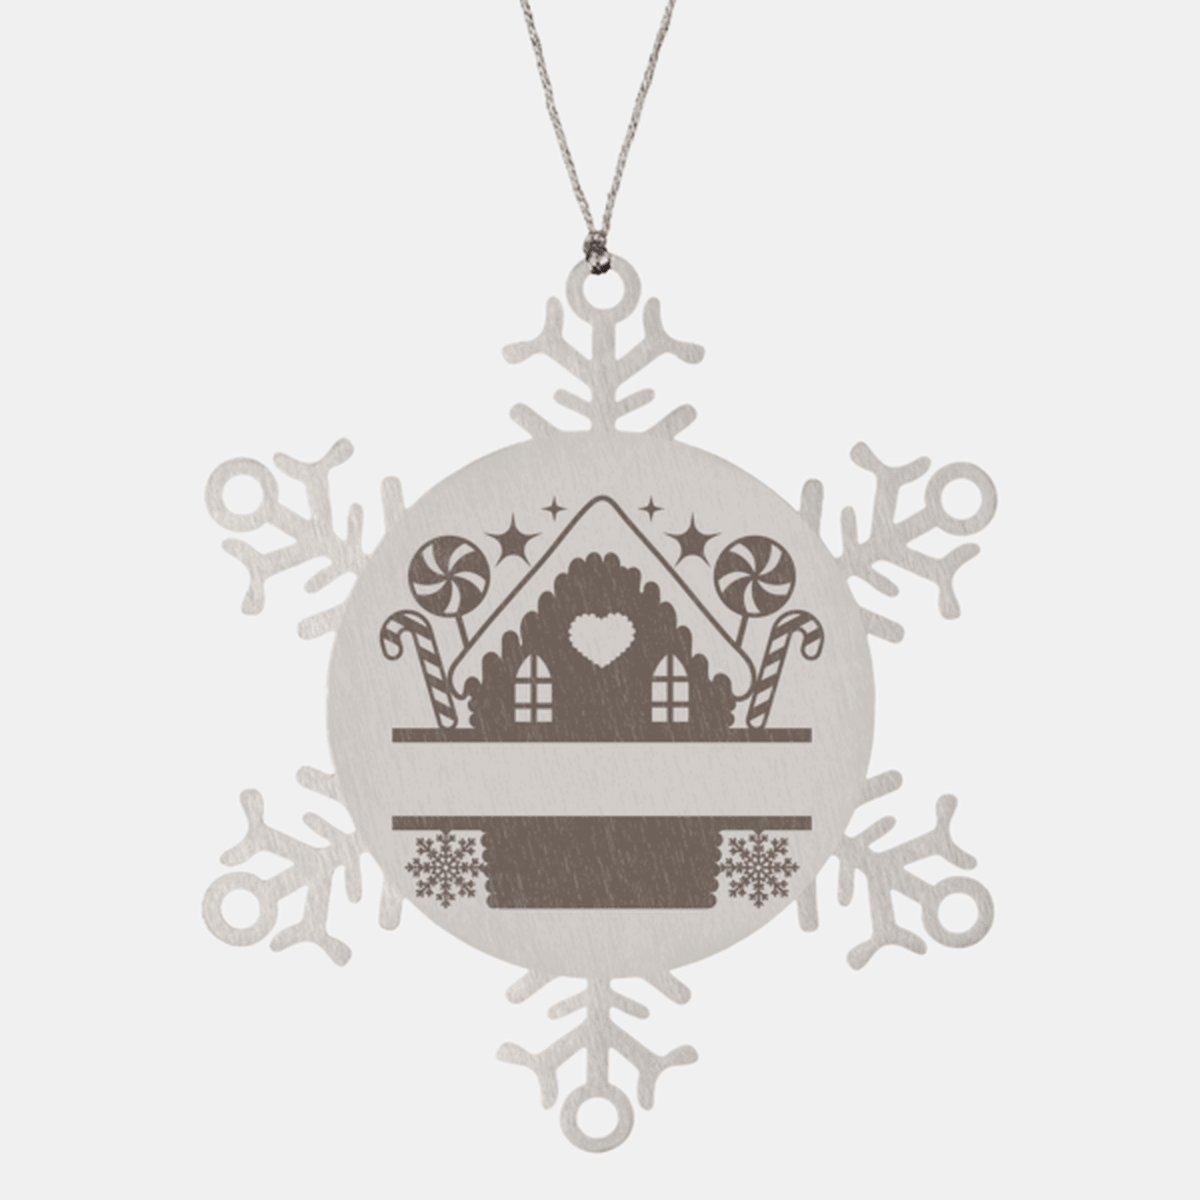 Personalized Snowflake Tree Ornament Family Name Laser Engraved Stainless Steel Gingerbread House - Mallard Moon Gift Shop